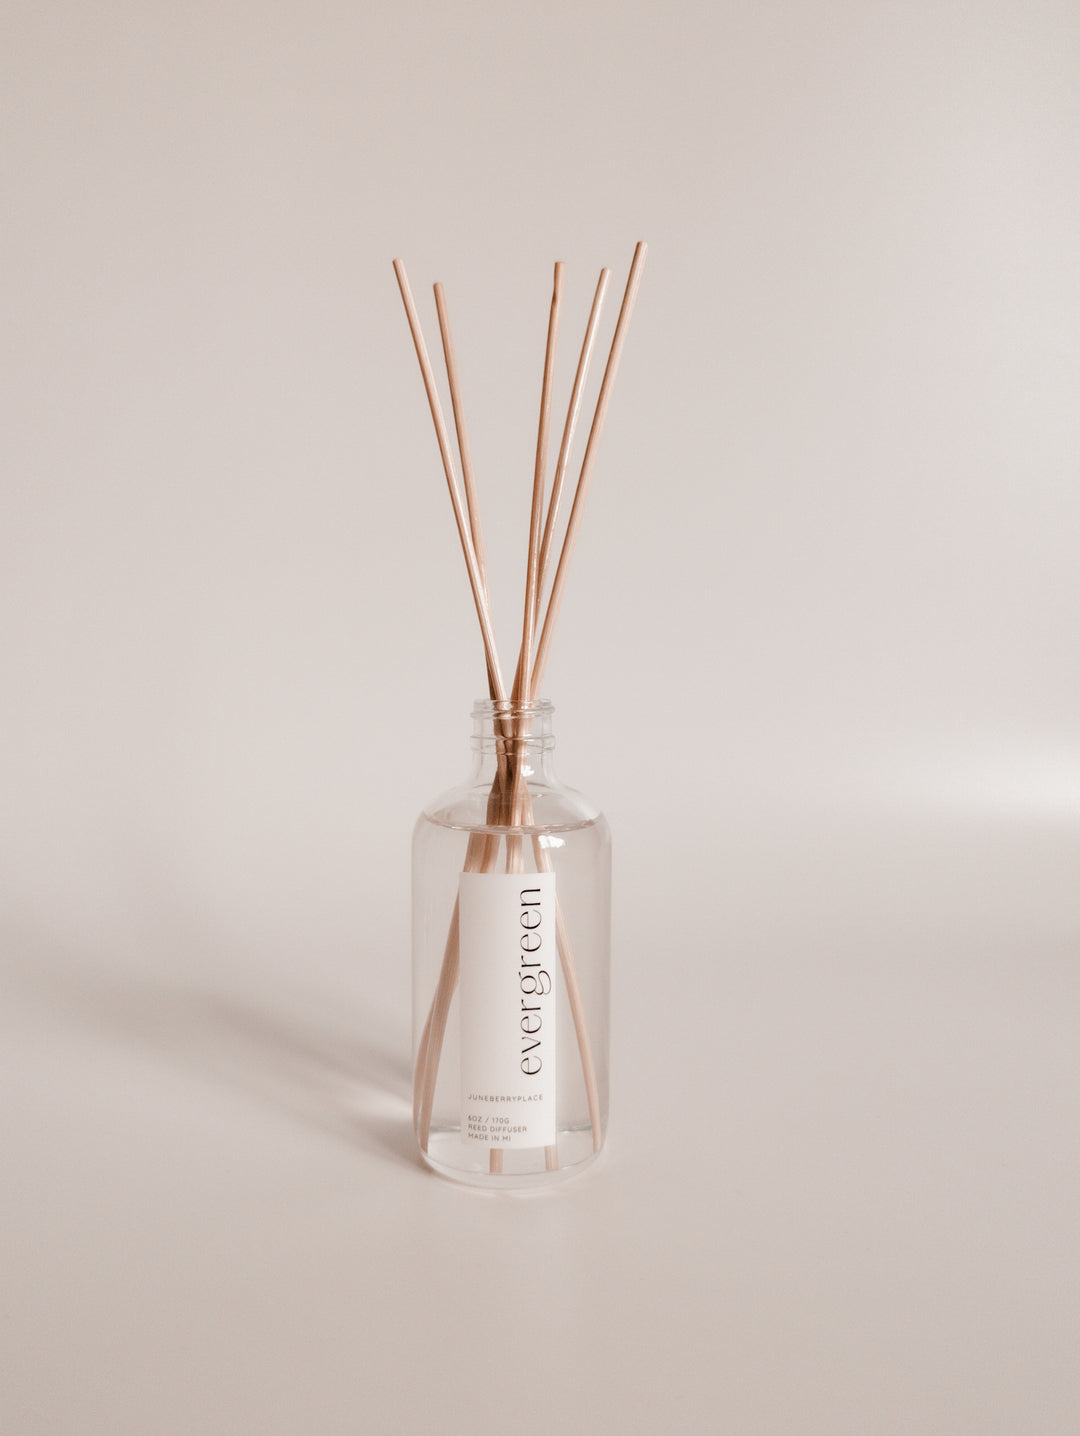 Evergreen Reed Diffuser in clear glass bottle with reeds by juneberryplace home fragrances